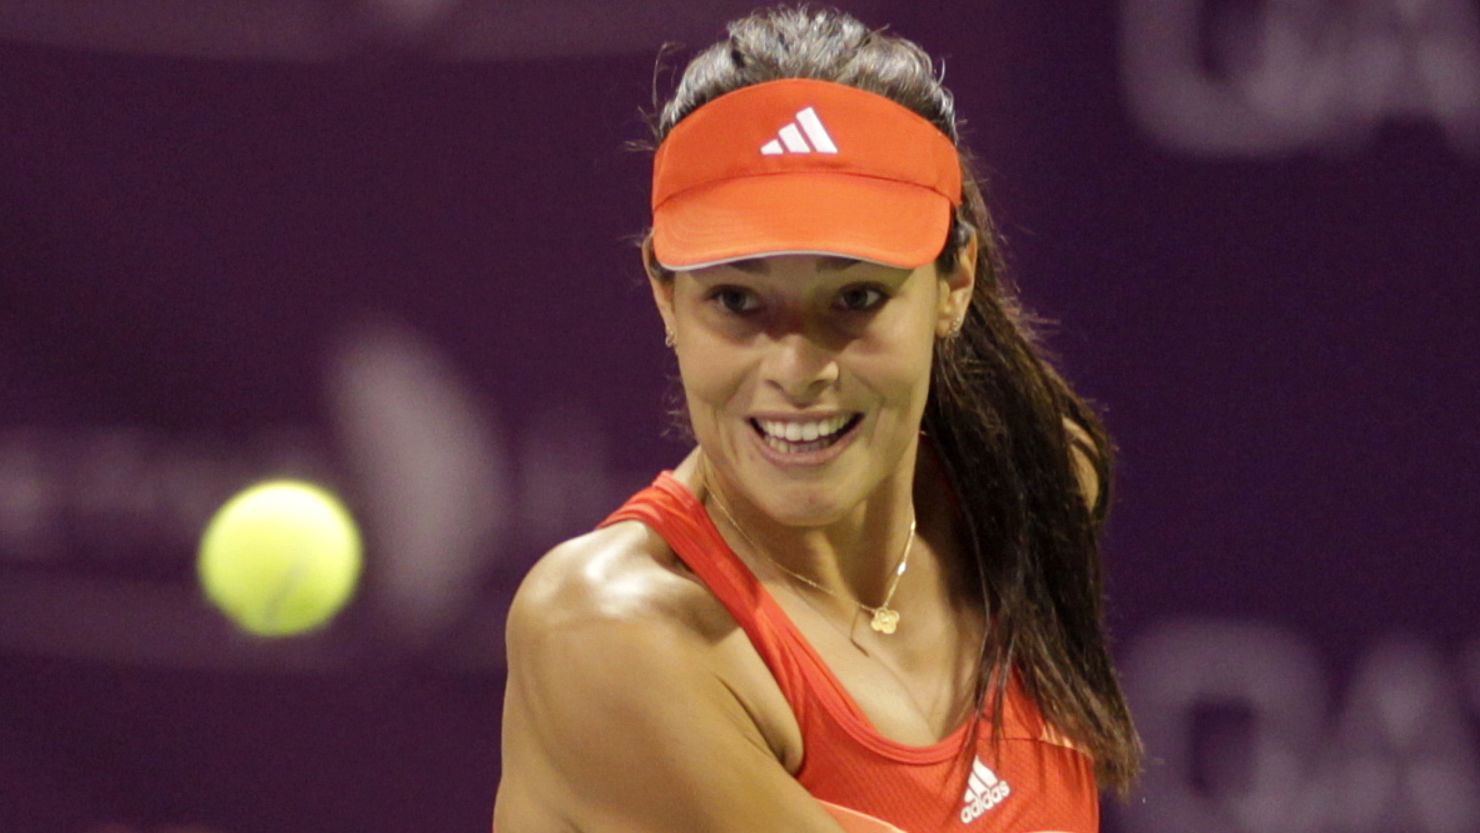 2008 French Open champion Ana Ivanovic has slipped down to 19th in the world rankings.